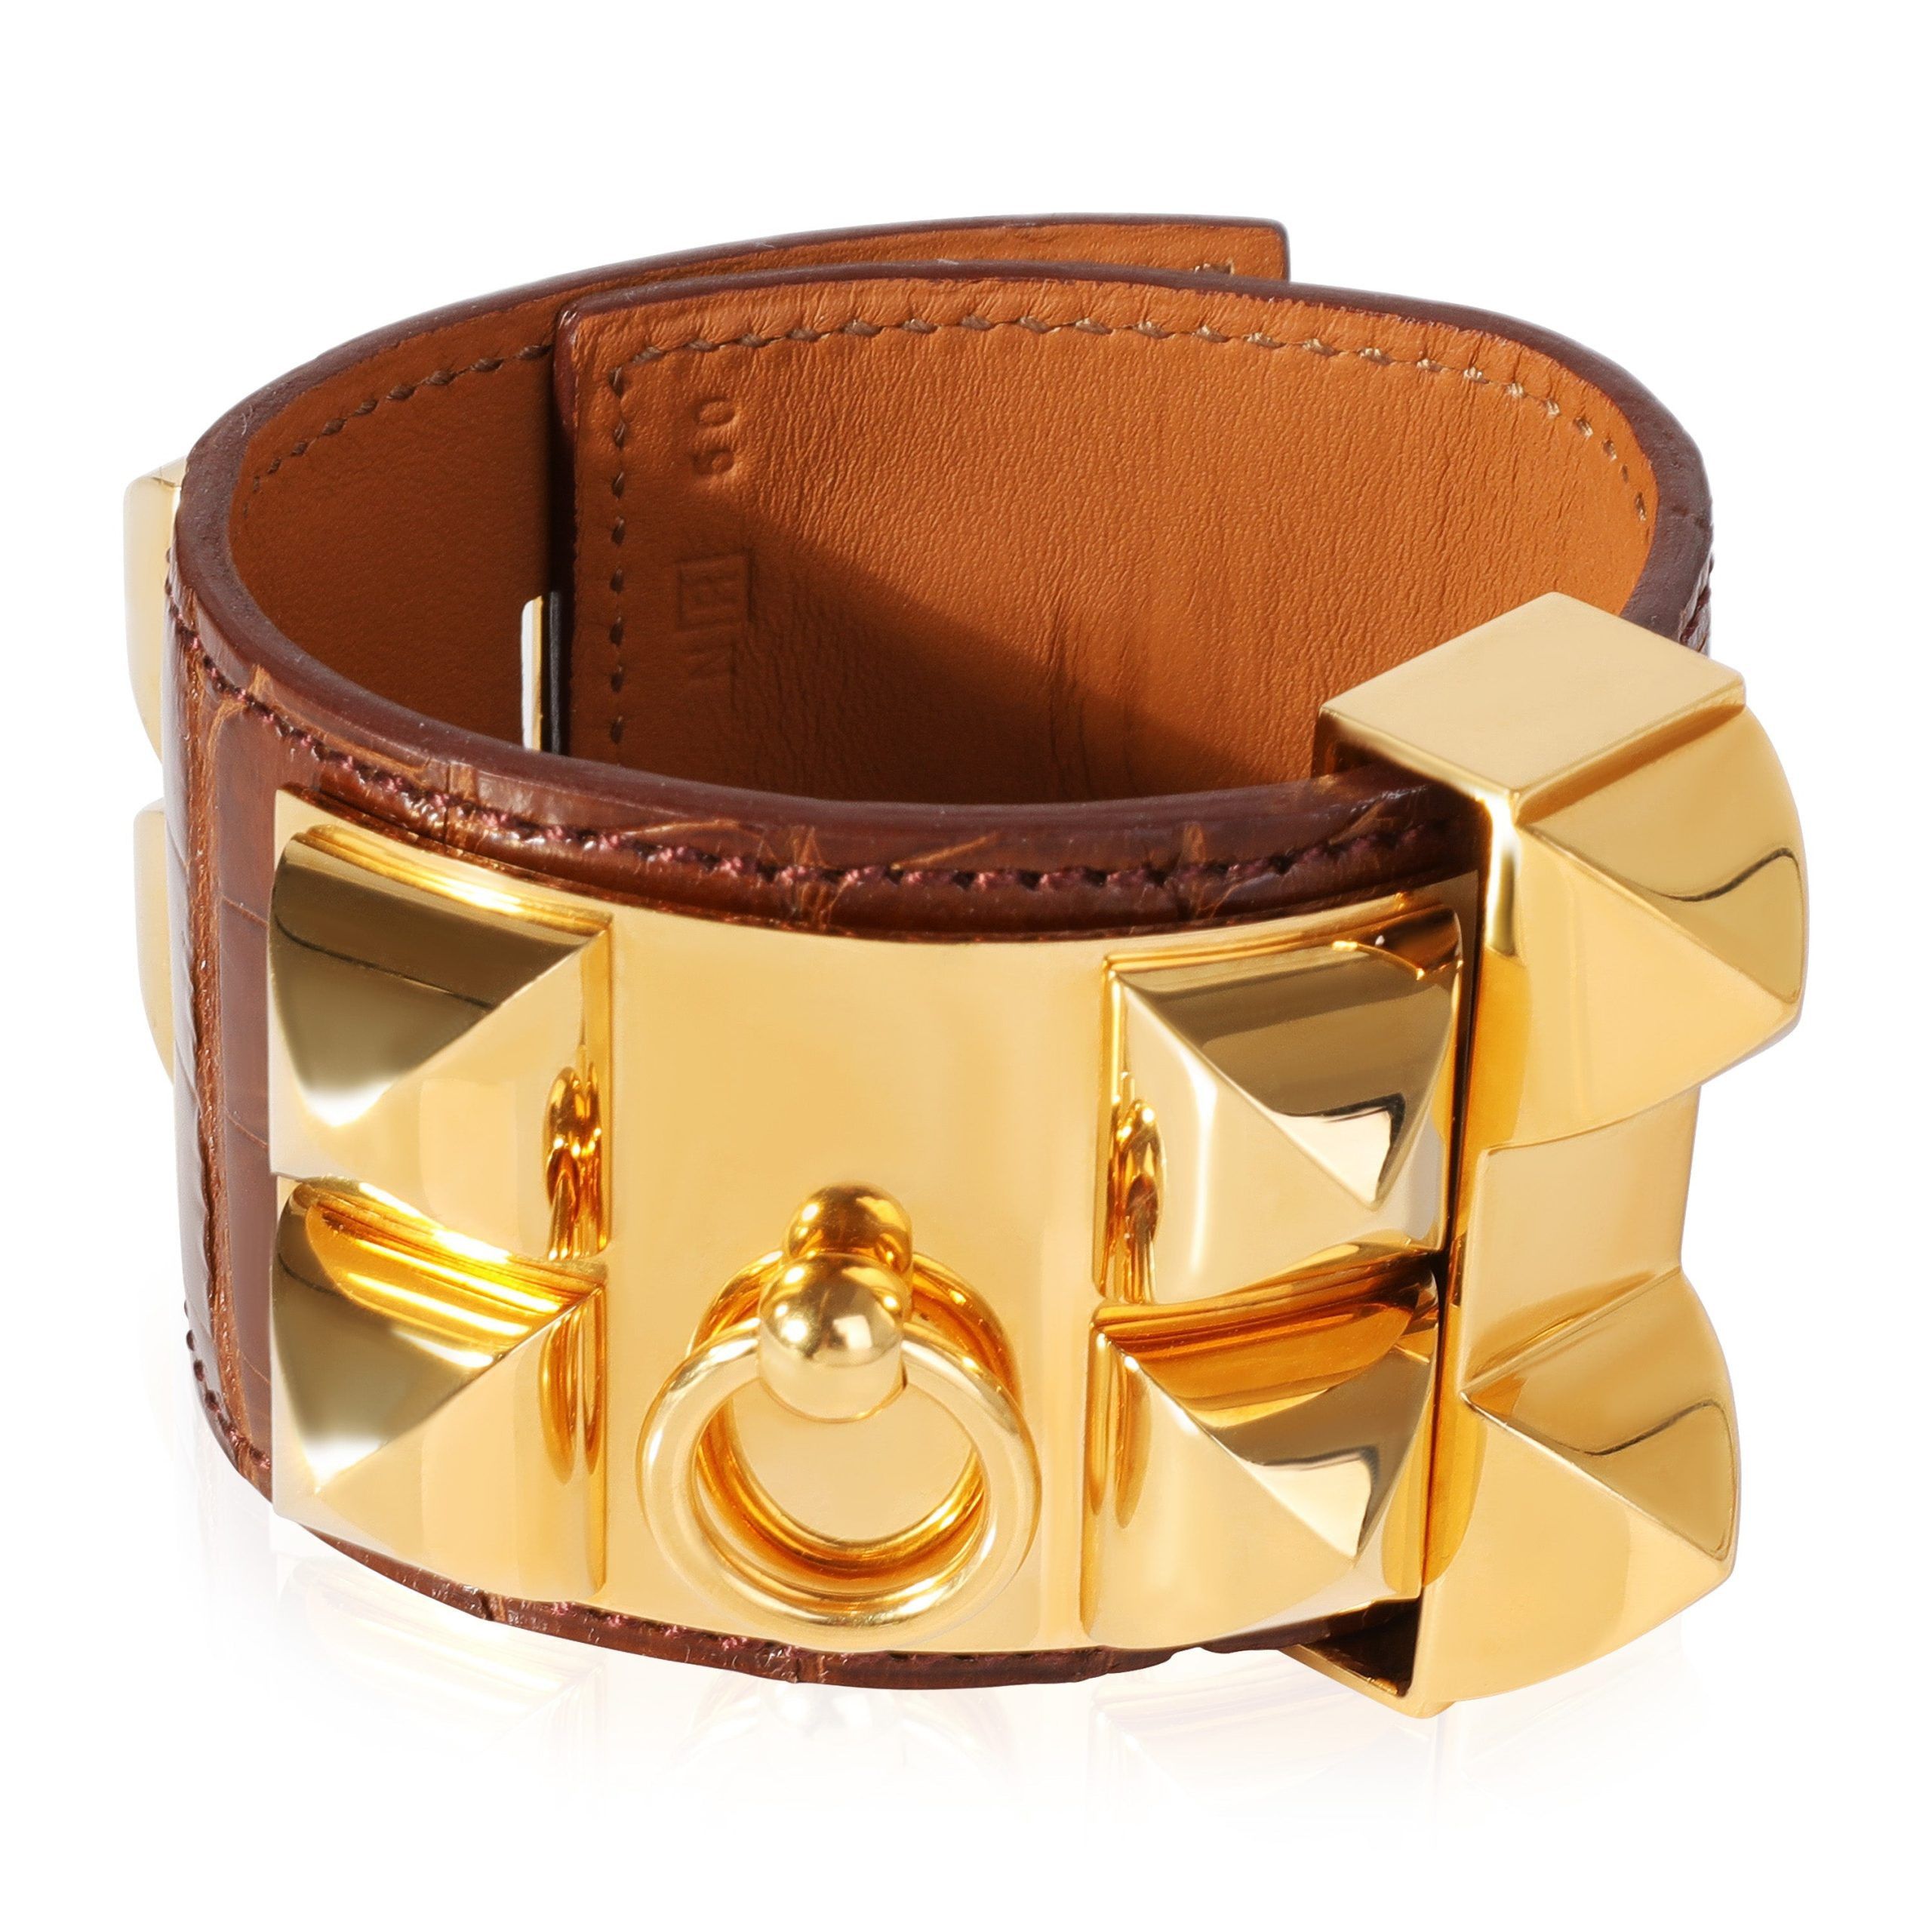 image of Hermes Collier De Chien Brown Leather Gold Tone Cuff, Women's